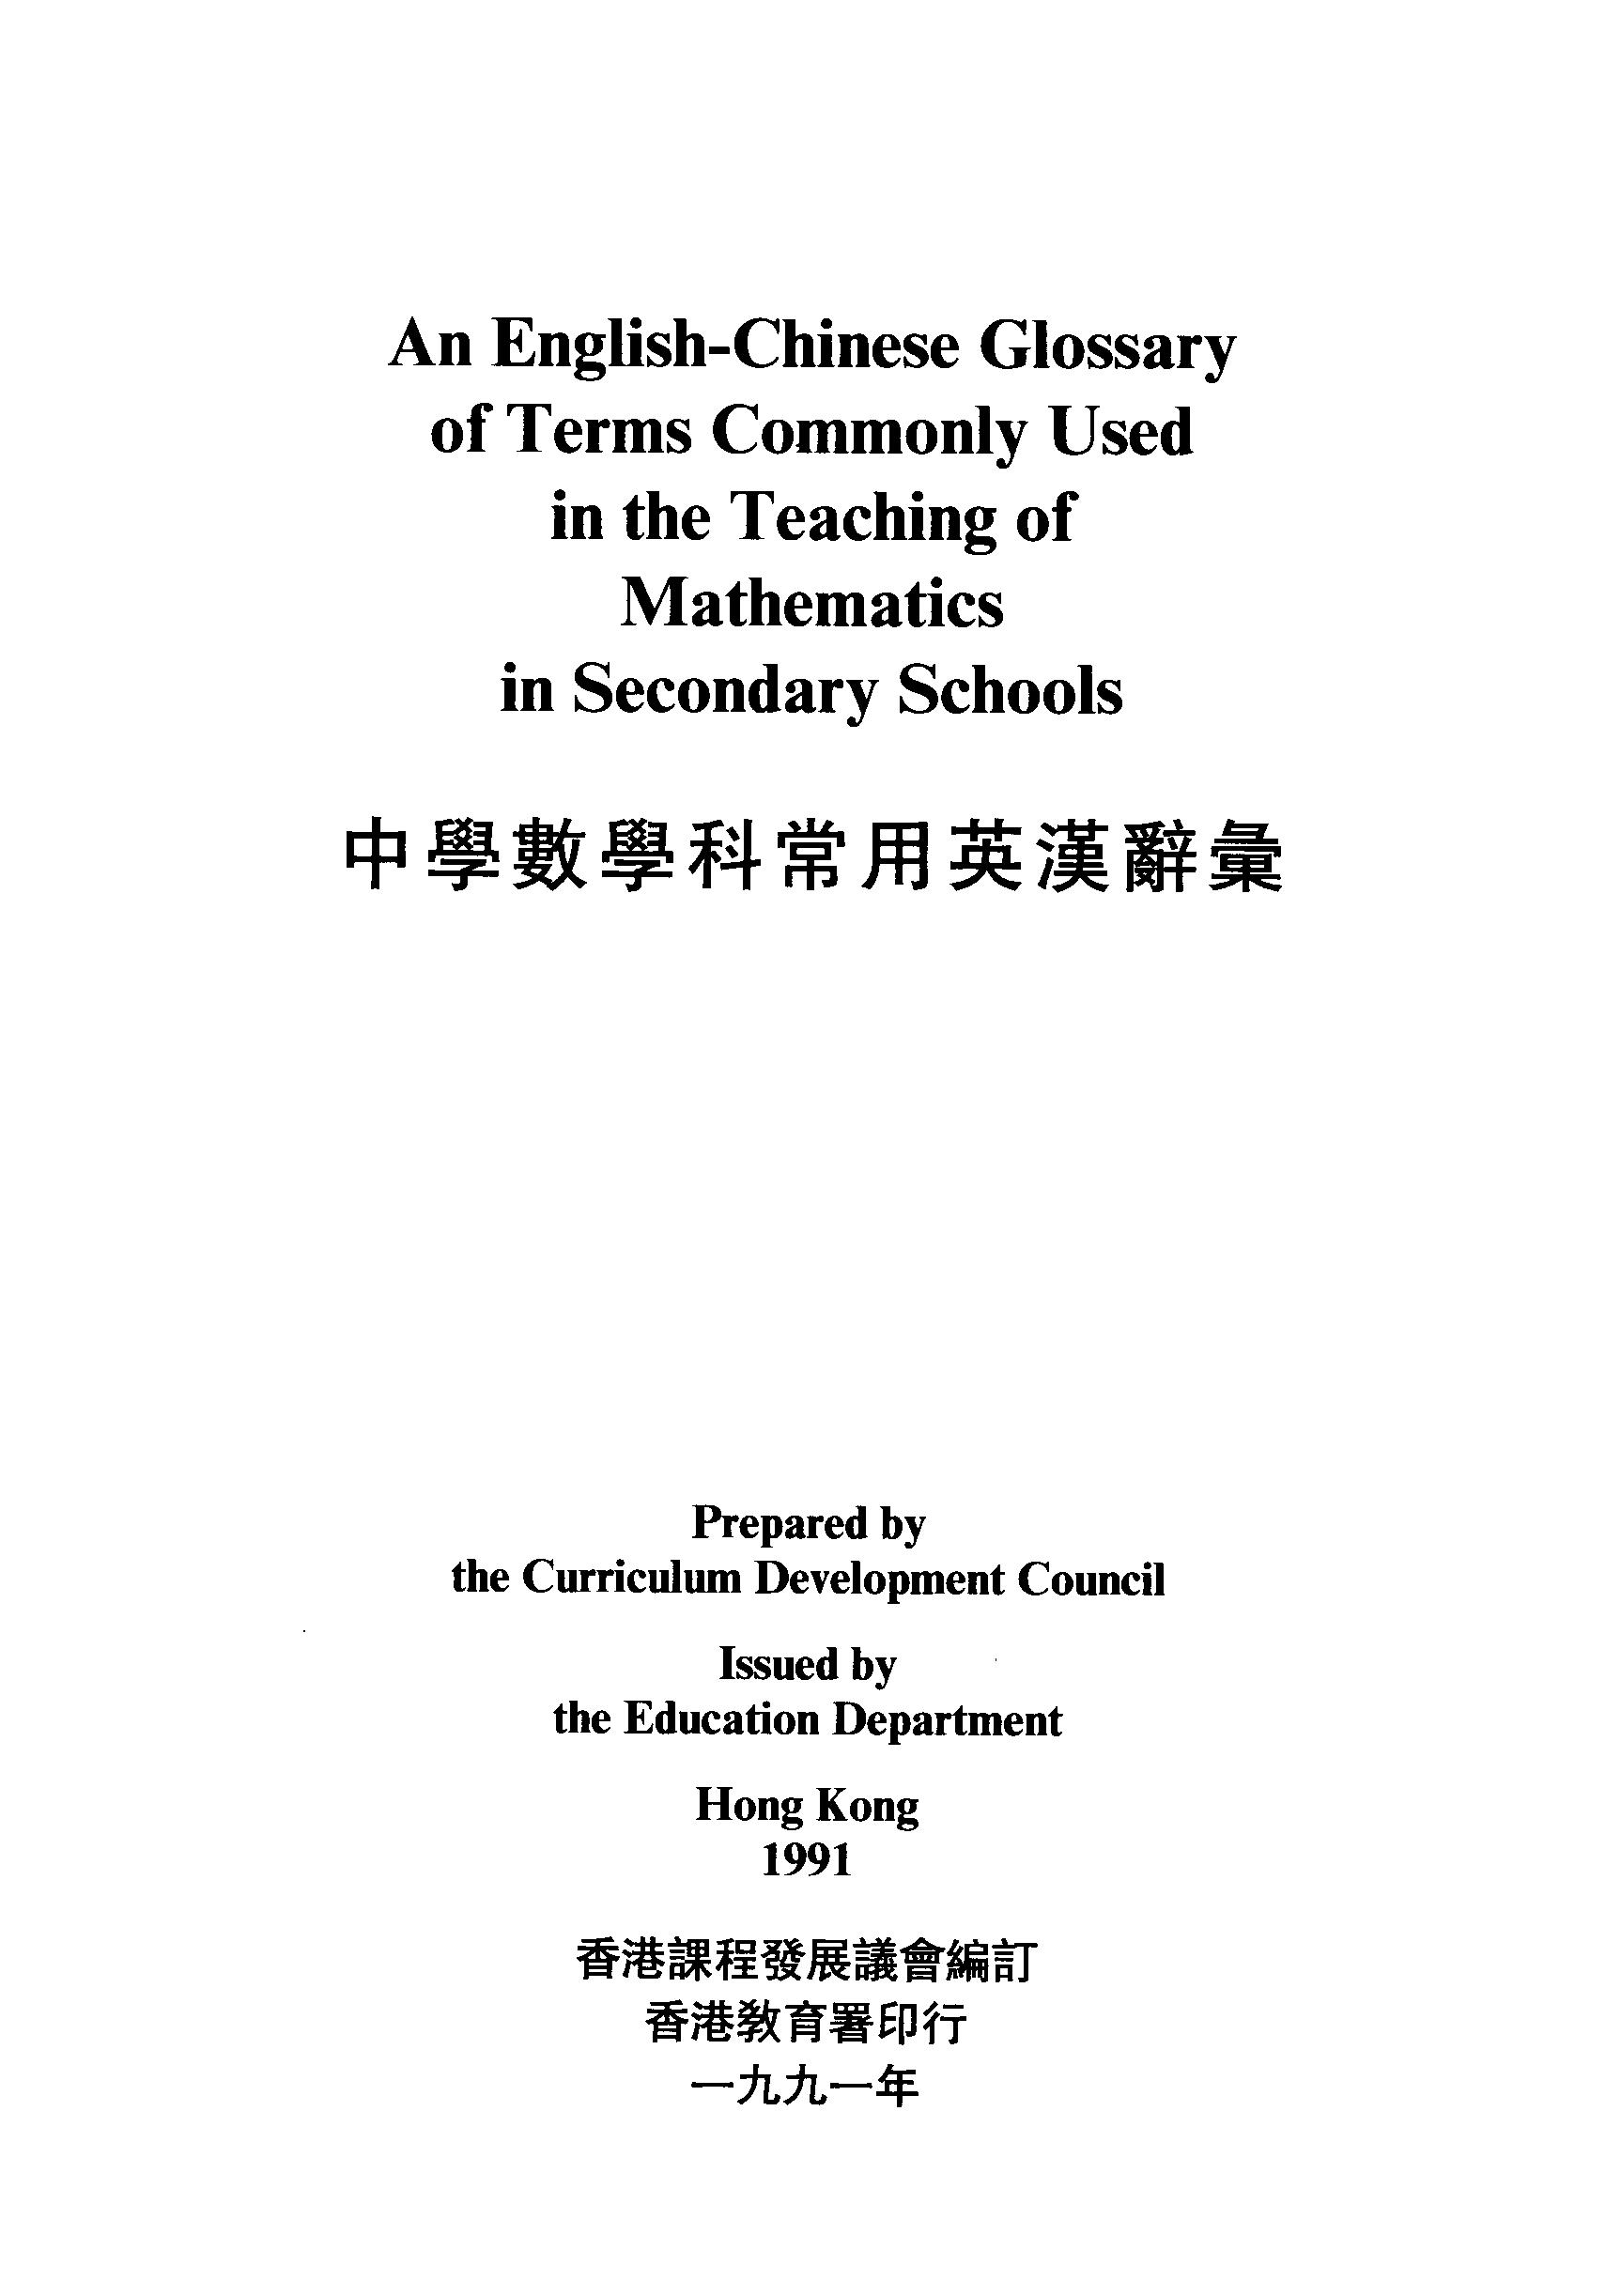 An English-Chinese Glossary of Terms Commonly Used in the Teaching of Mathematics in Secondary Schools